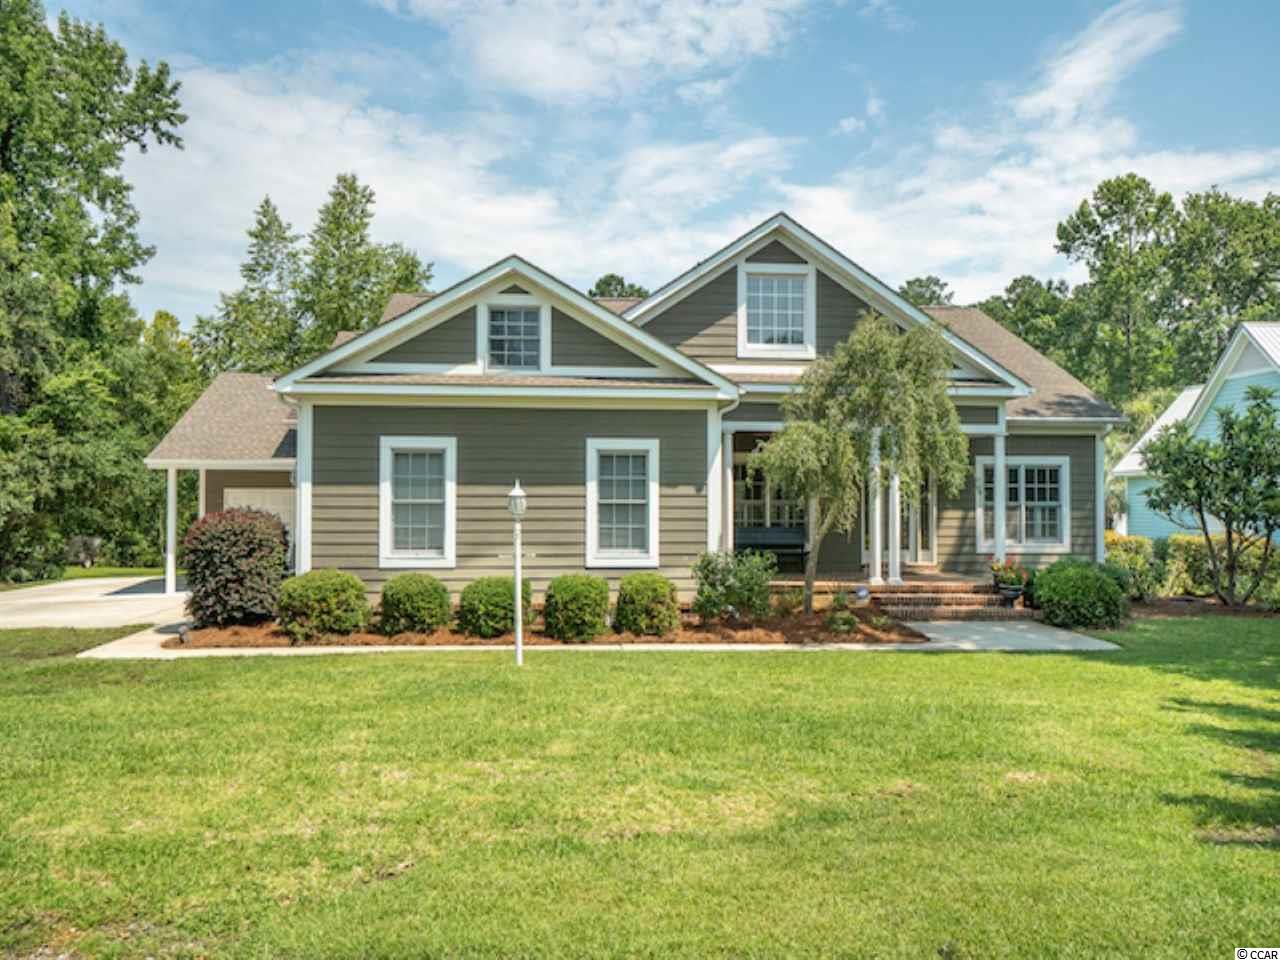 3876 Cow House Ct. Murrells Inlet, SC 29576